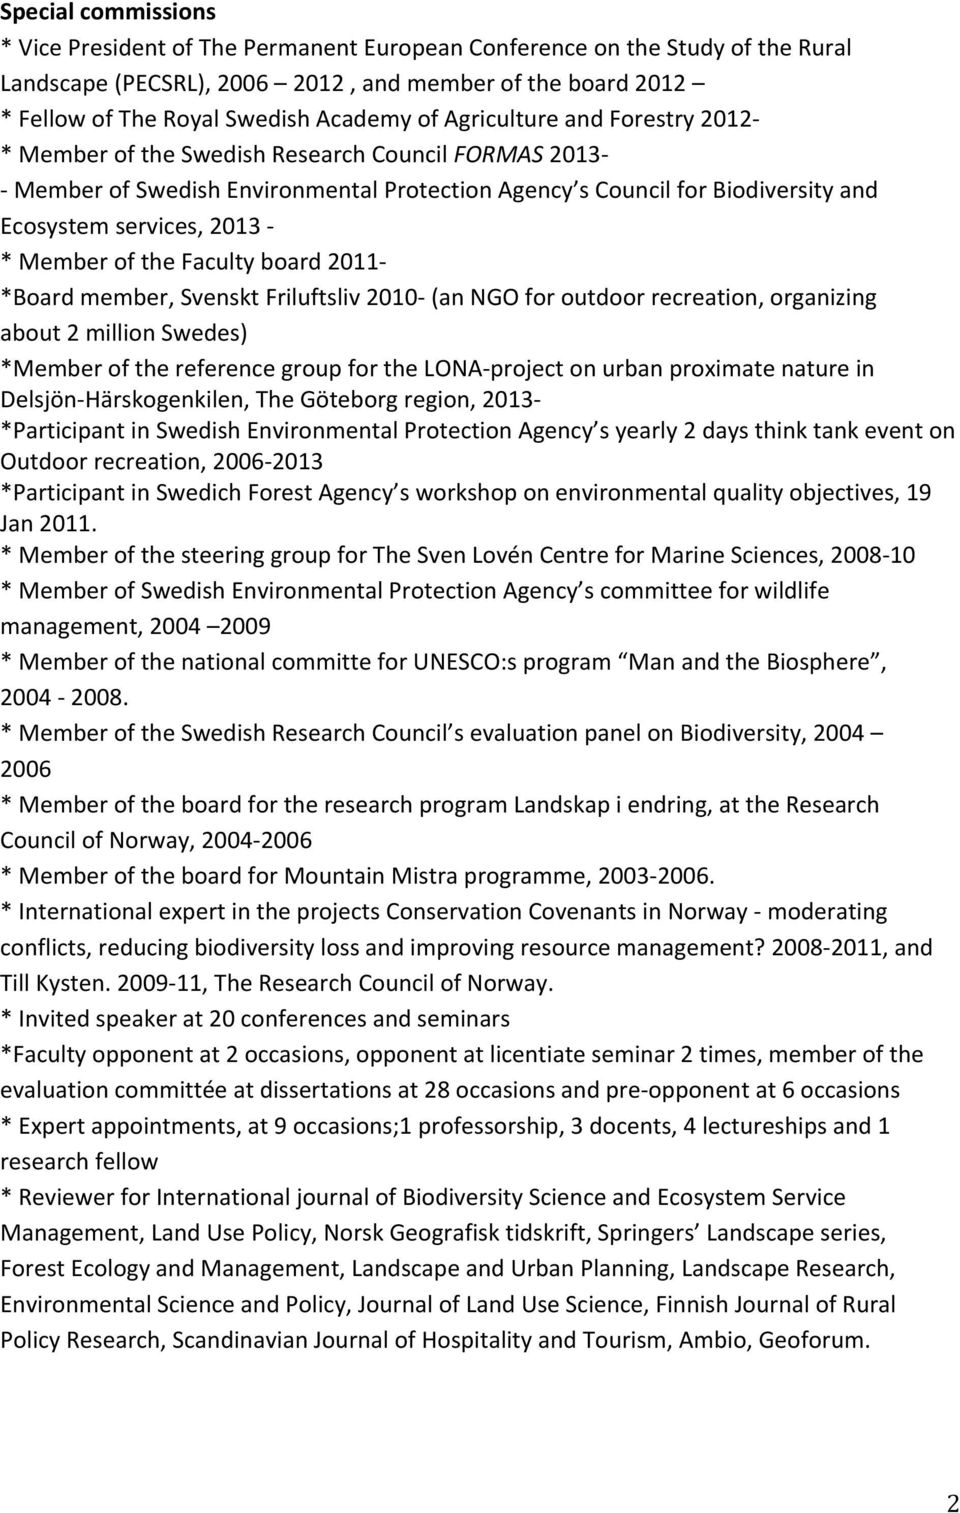 Member of the Faculty board 2011- *Board member, Svenskt Friluftsliv 2010- (an NGO for outdoor recreation, organizing about 2 million Swedes) *Member of the reference group for the LONA- project on